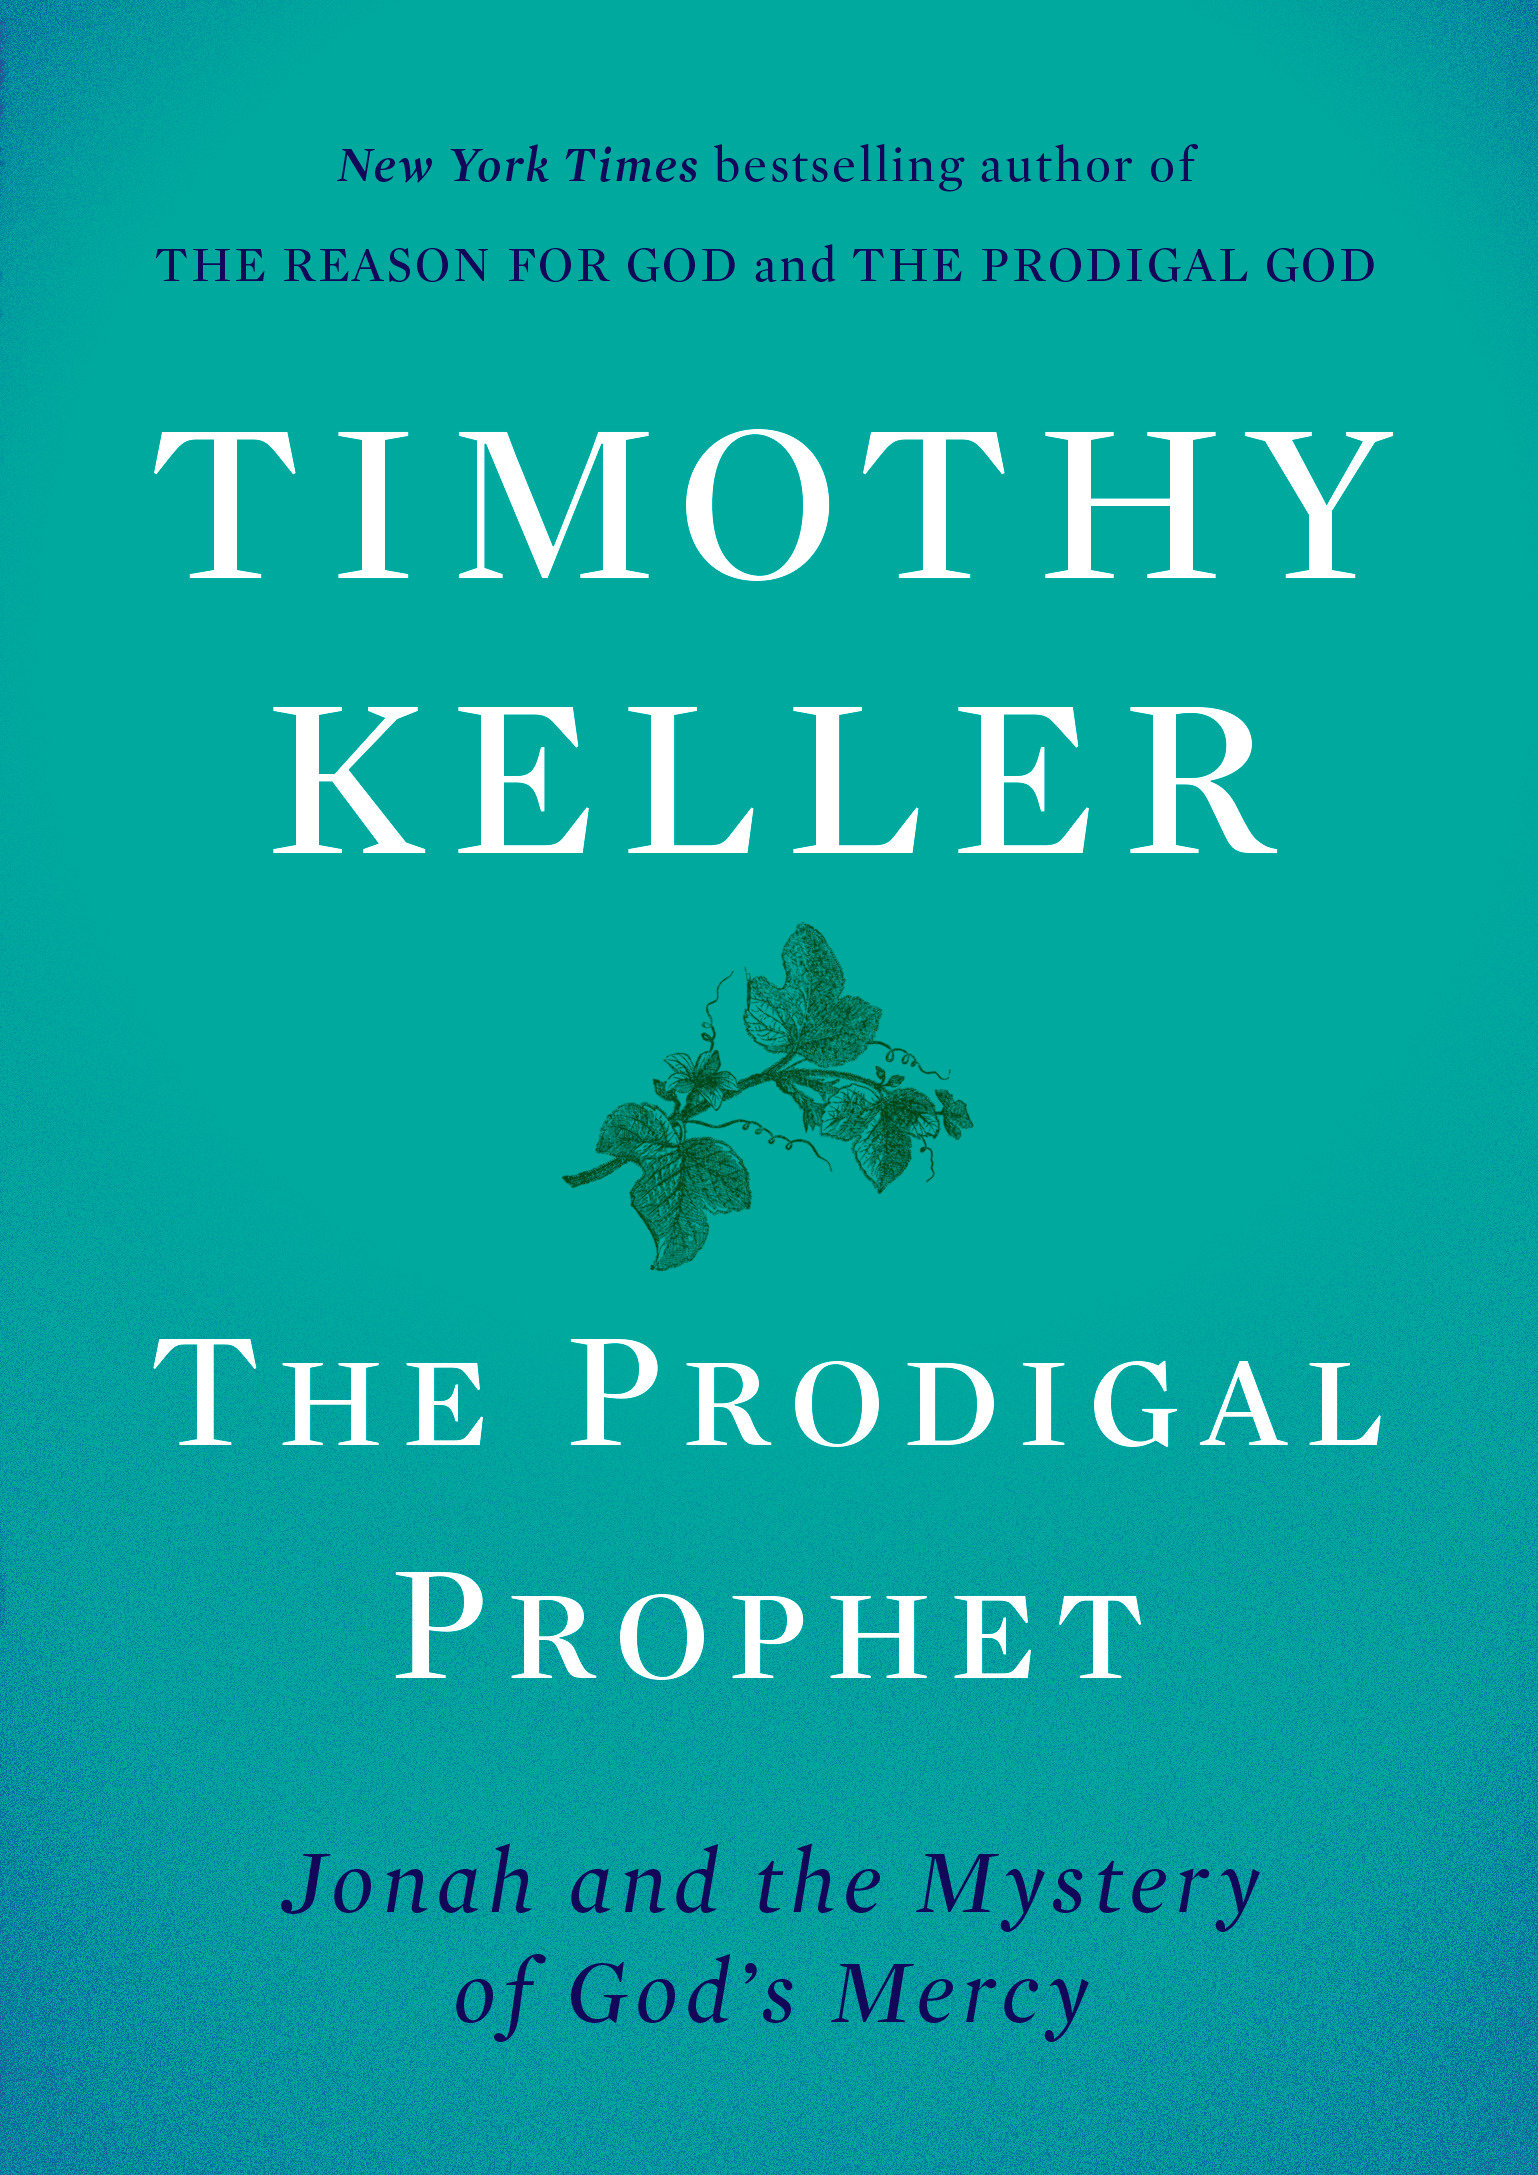 The Prodigal Prophet (Hardcover Book)